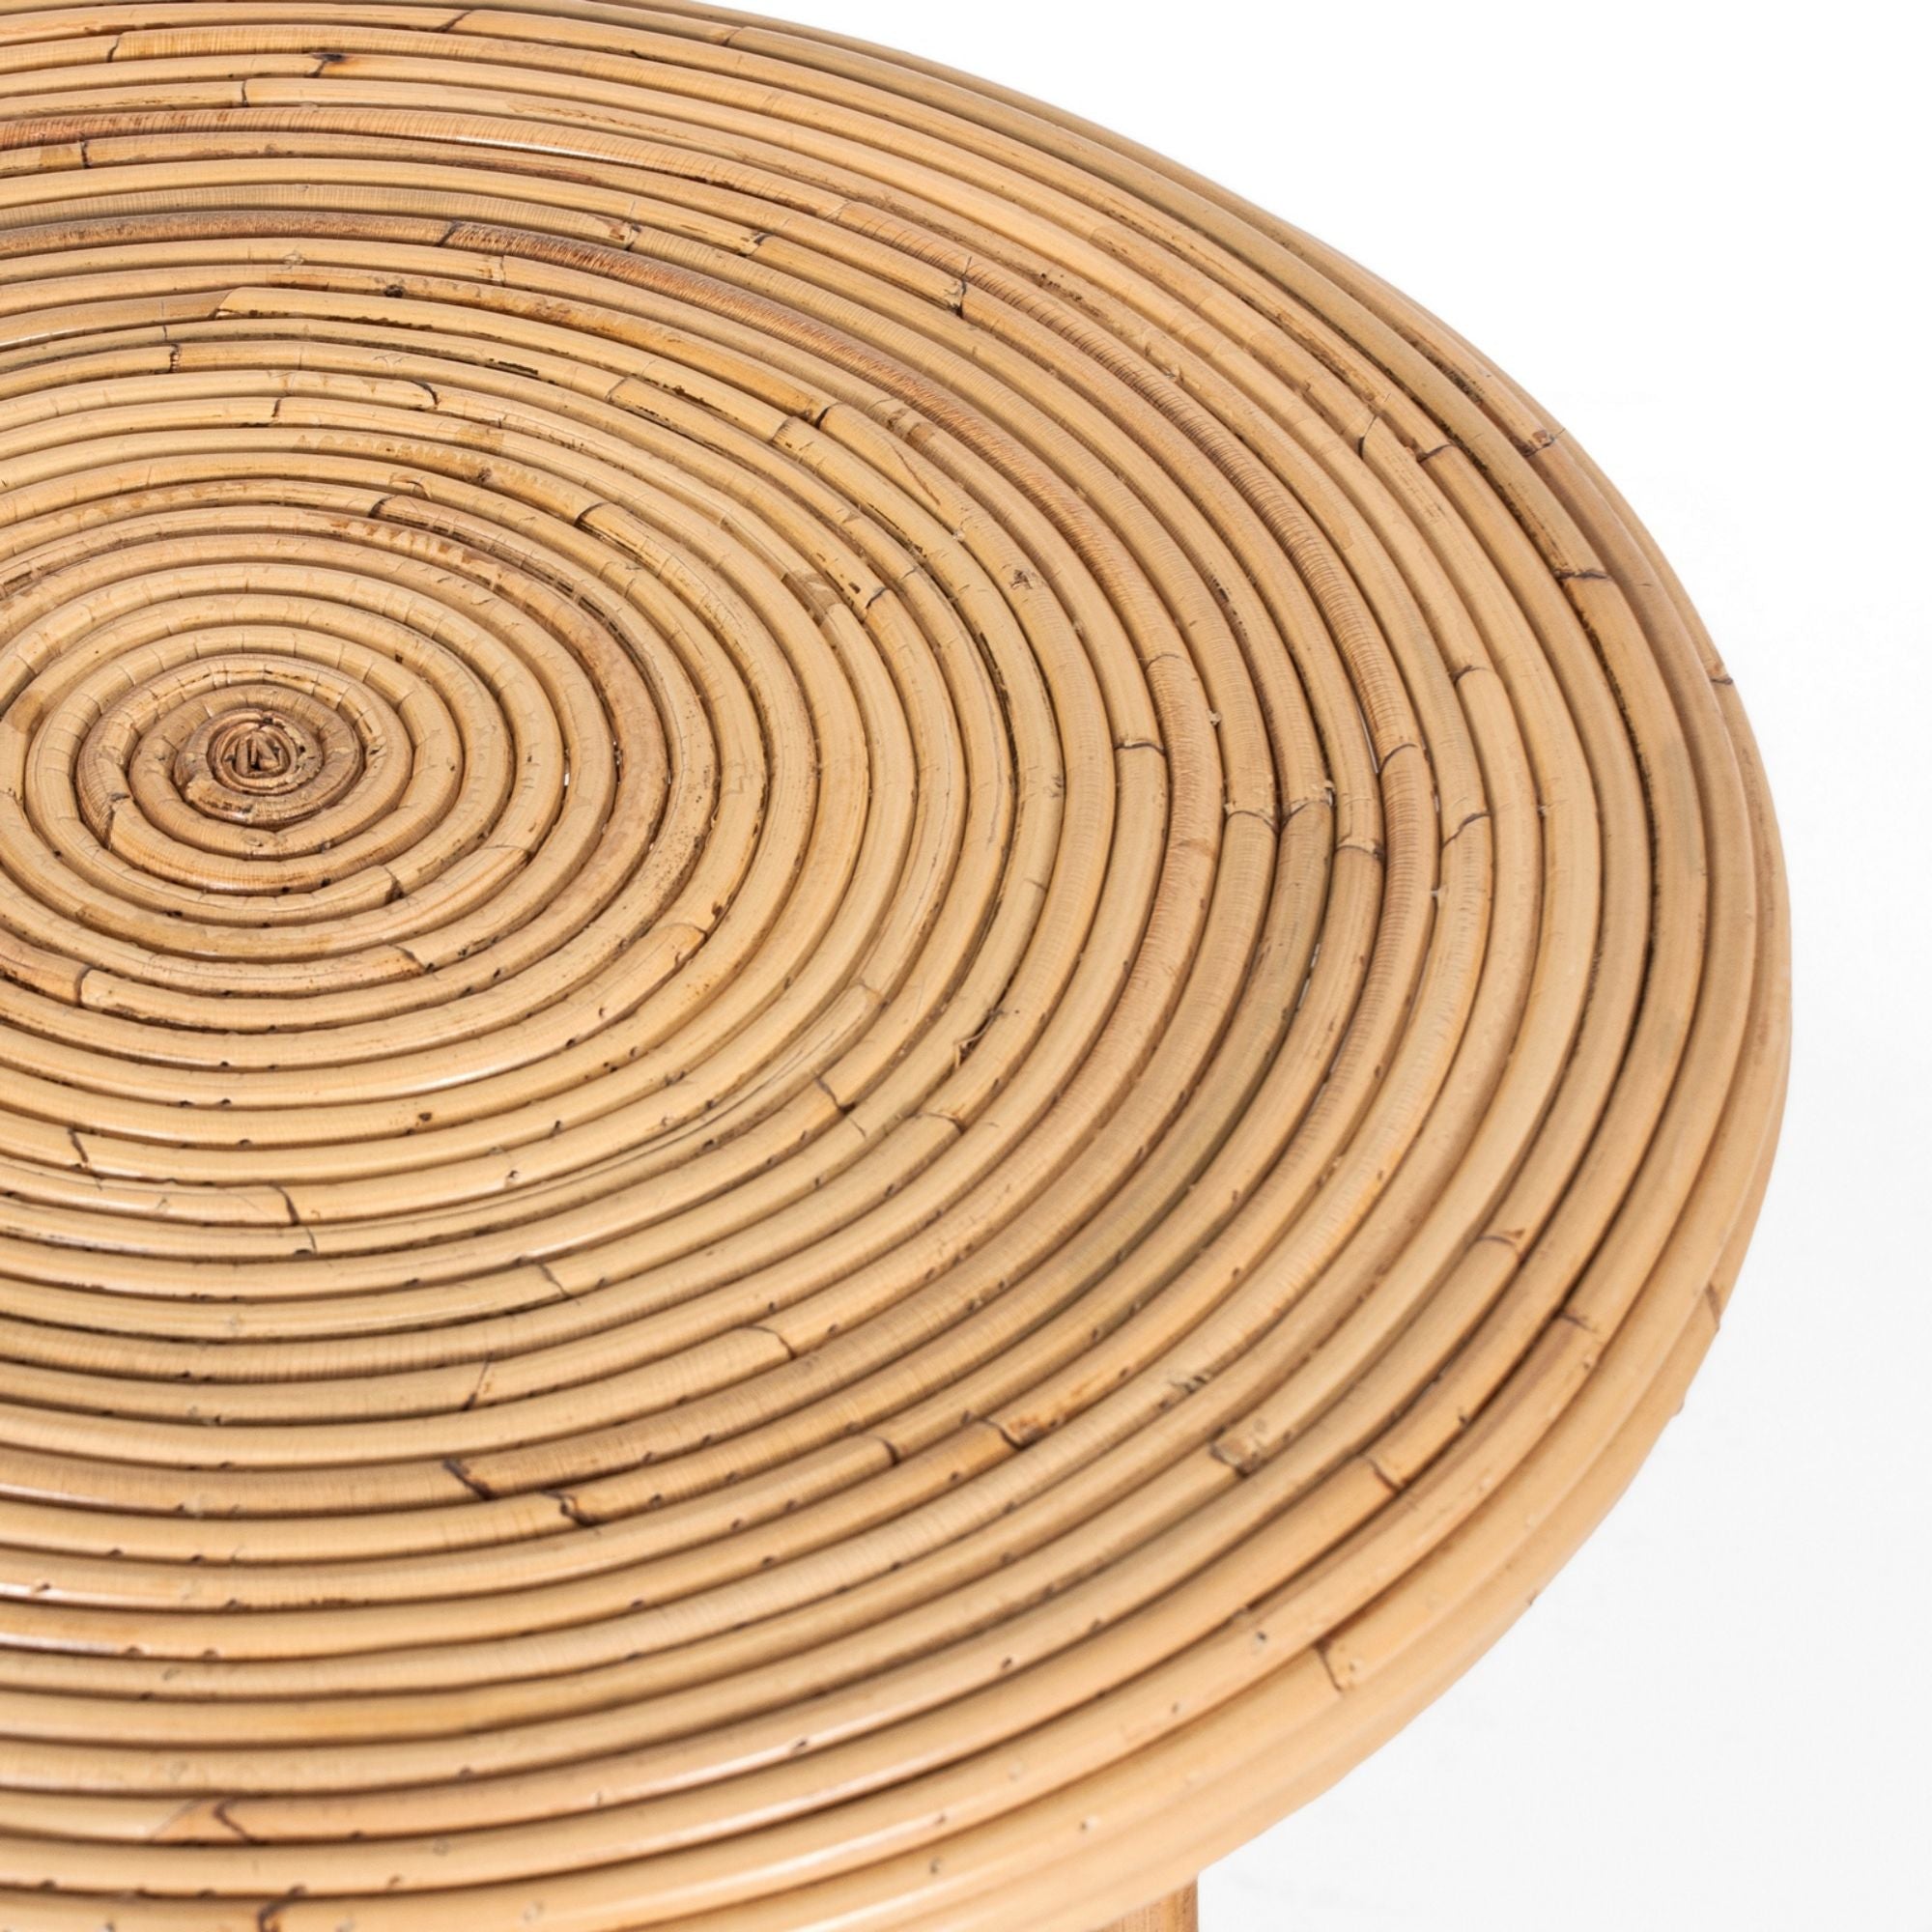 Rattan Round Coffee Table 80Cm - Natural